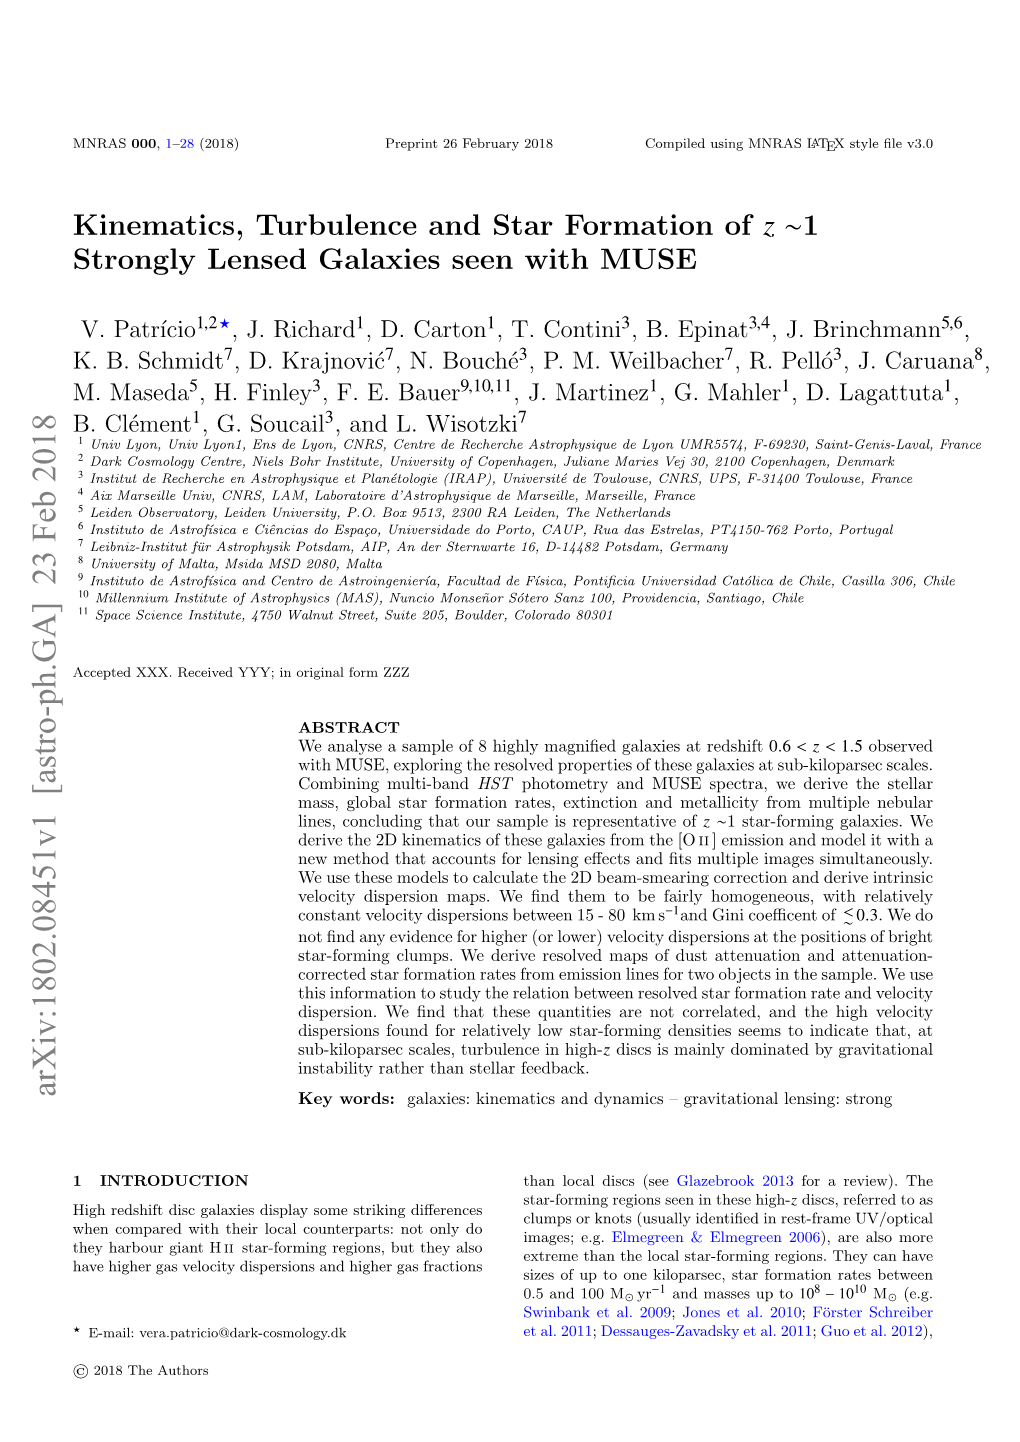 Kinematics, Turbulence and Star Formation of Z ∼1 Strongly Lensed Galaxies Seen with MUSE